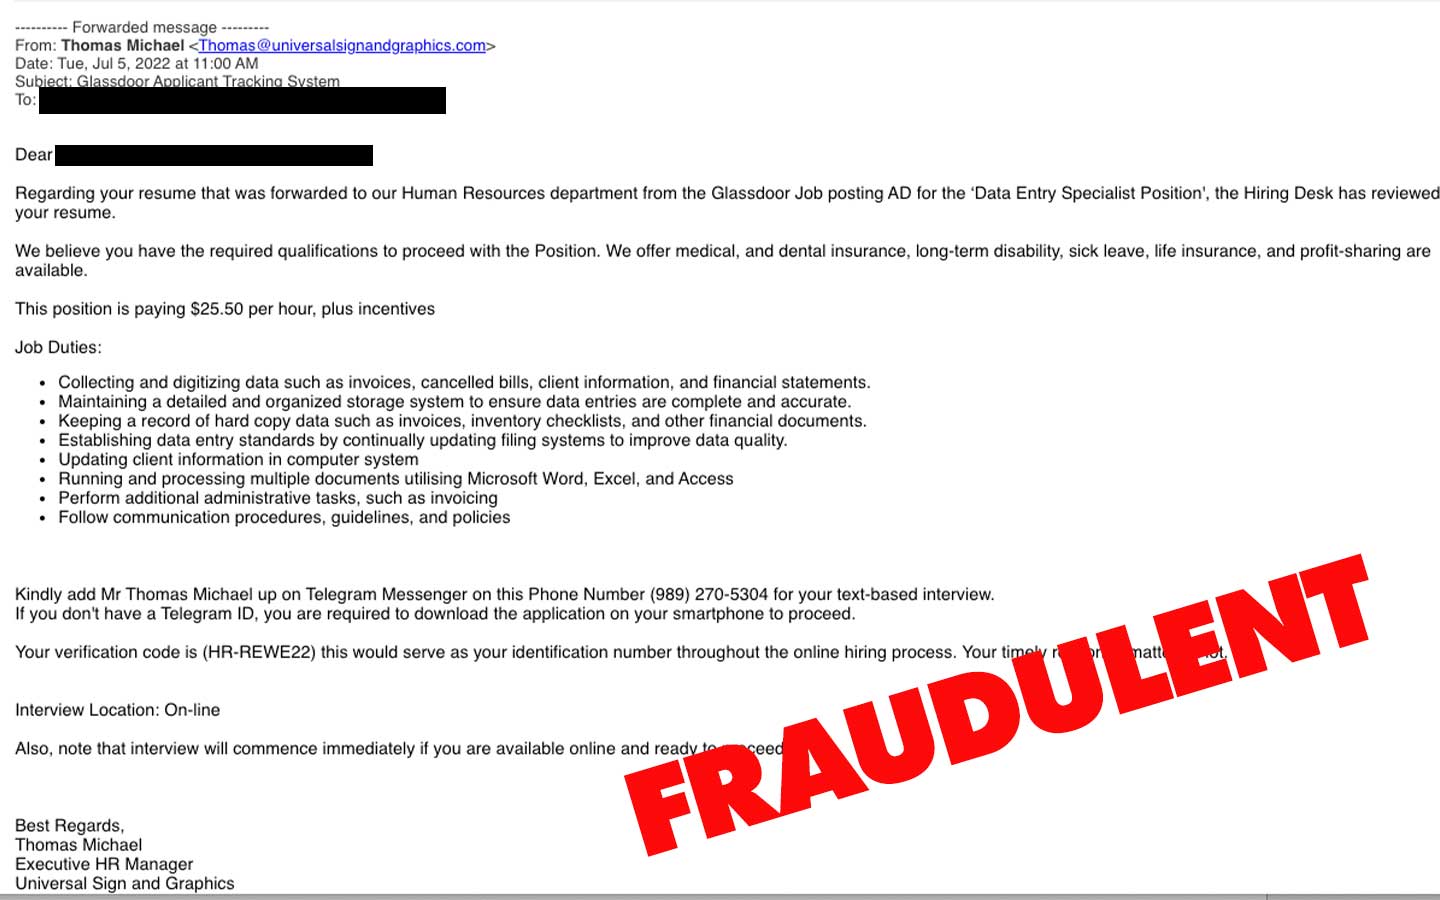 Universal_Sign_and_Graphics_Fraudulent_Email_400x900